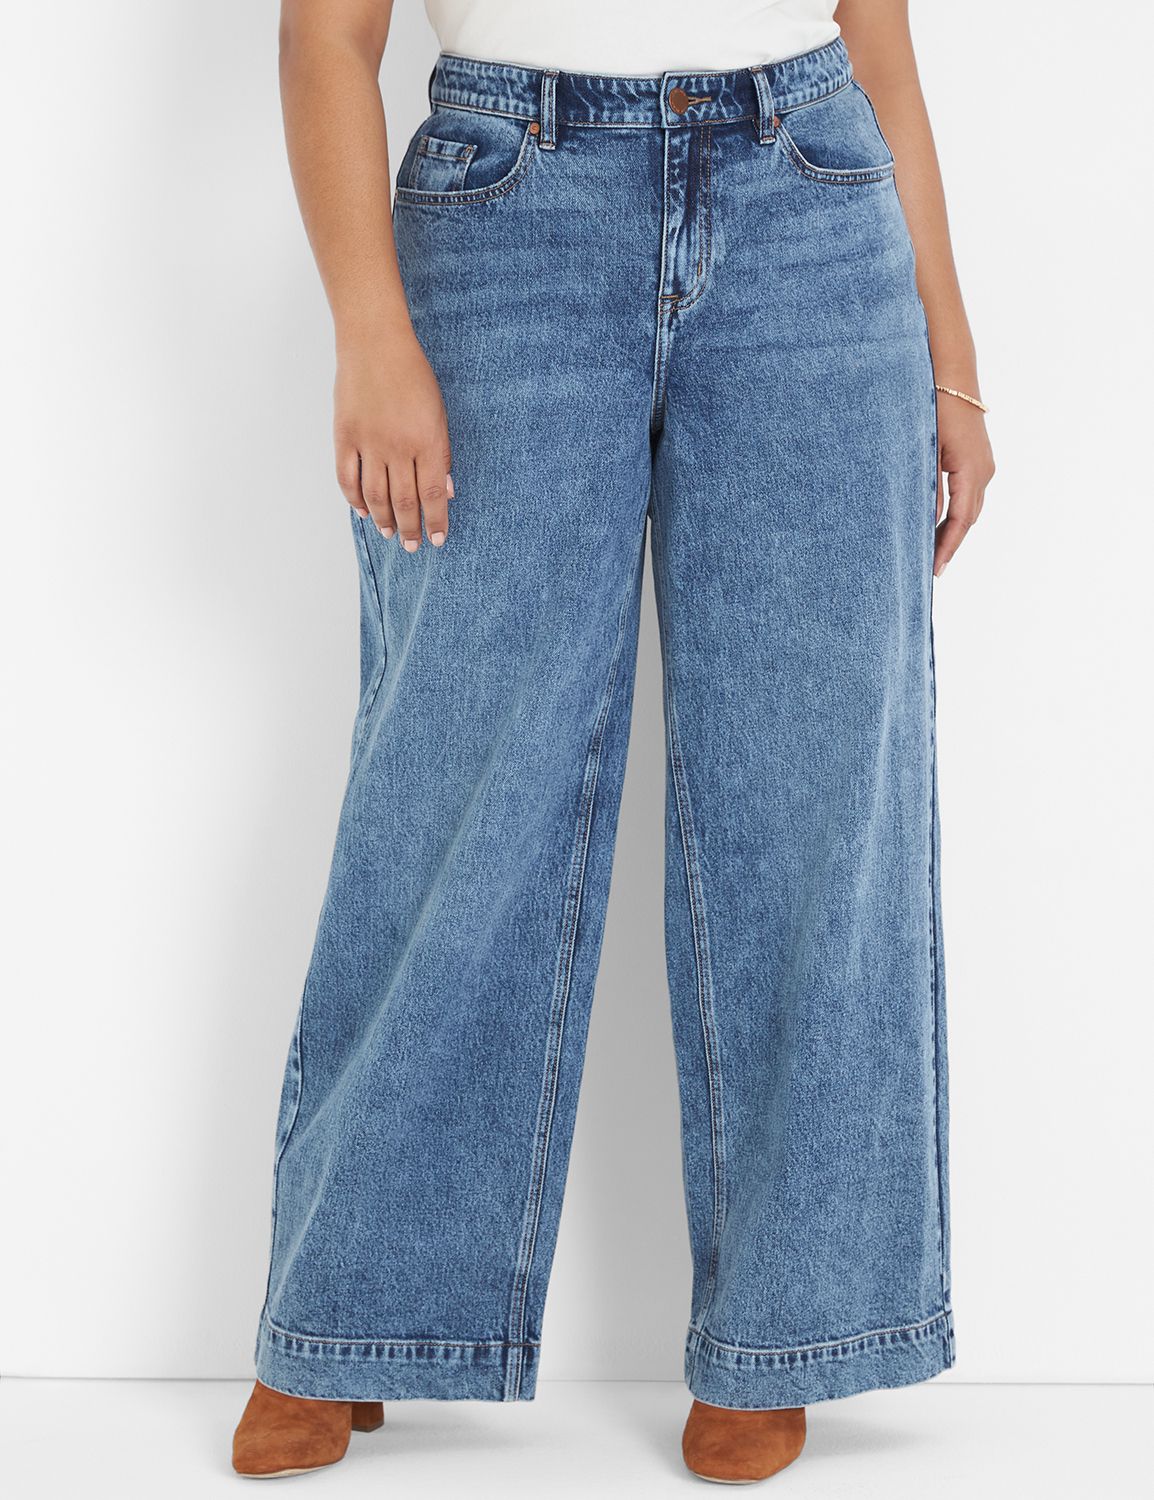 Best Plus Size Tall Jeans: Top 5 Brands for Comfort and Style ...